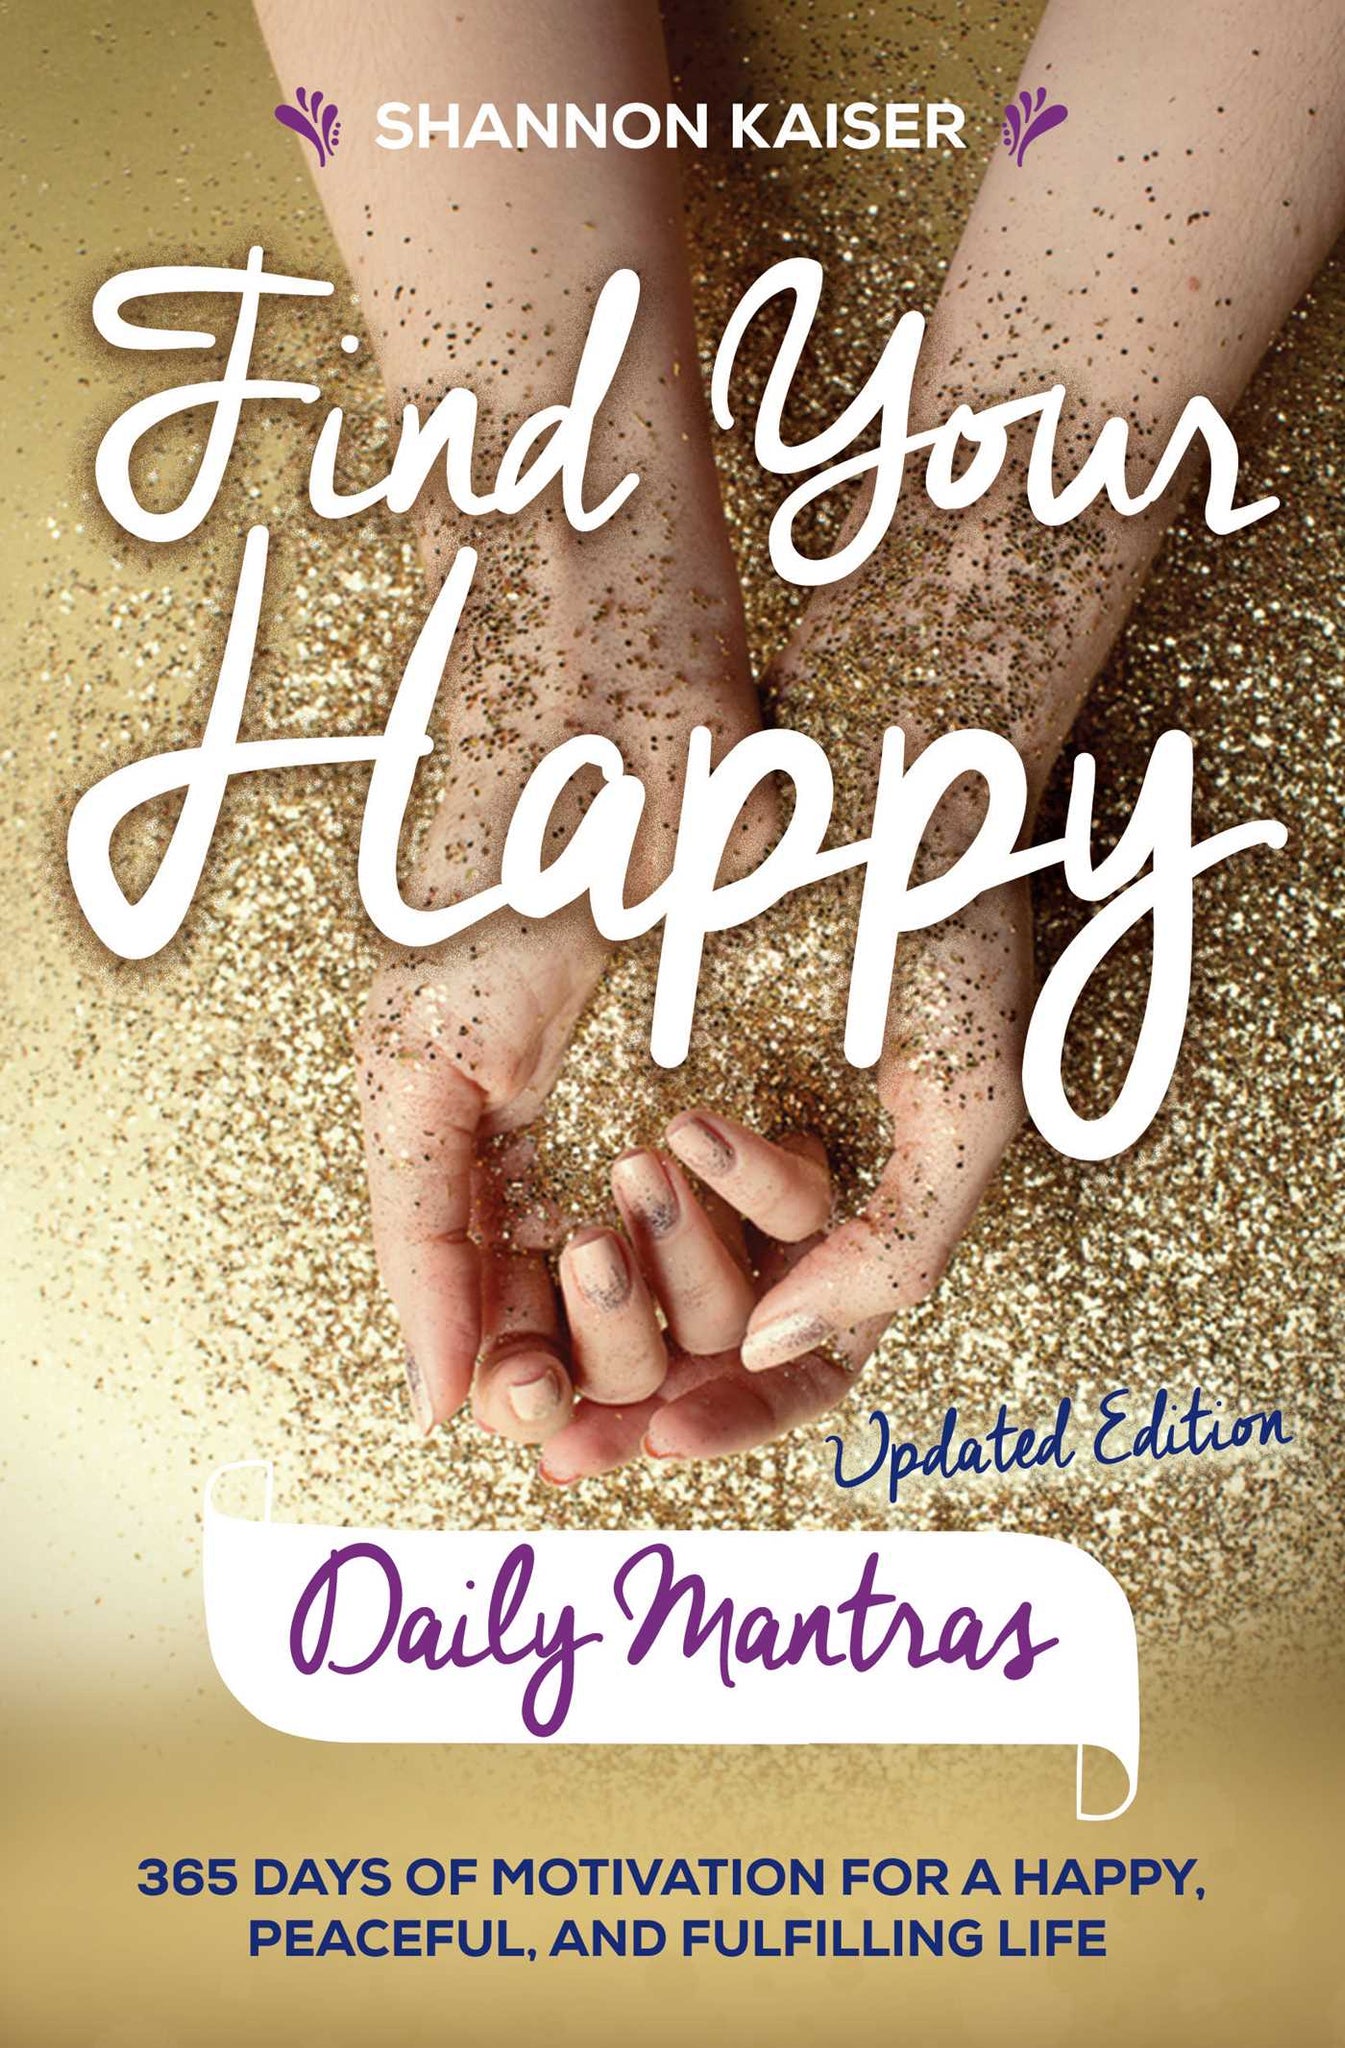 Find Your Happy Daily Mantras : 365 Days of Motivation for a Happy, Peaceful, and Fulfilling Life